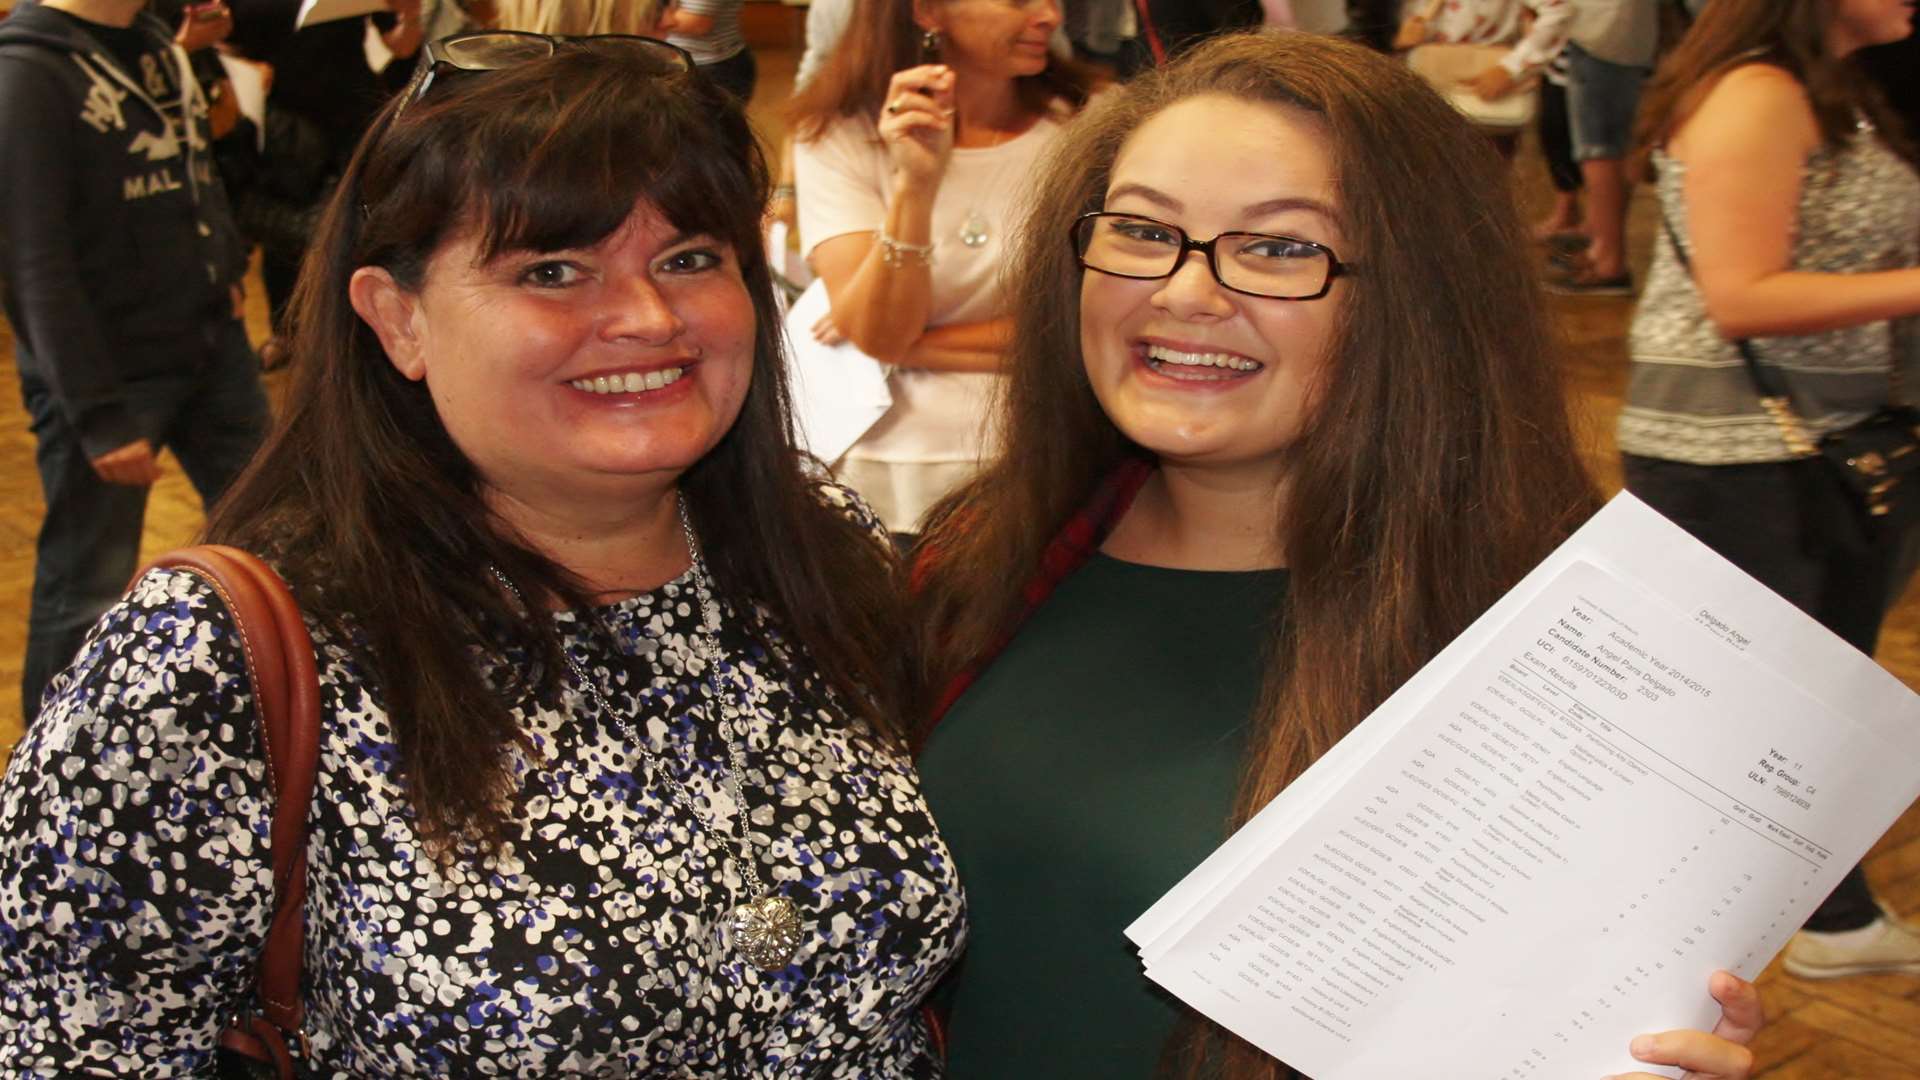 Angel Delgado is congratulated by her mum Alison Burke on her excellent GCSE results at Ursuline College